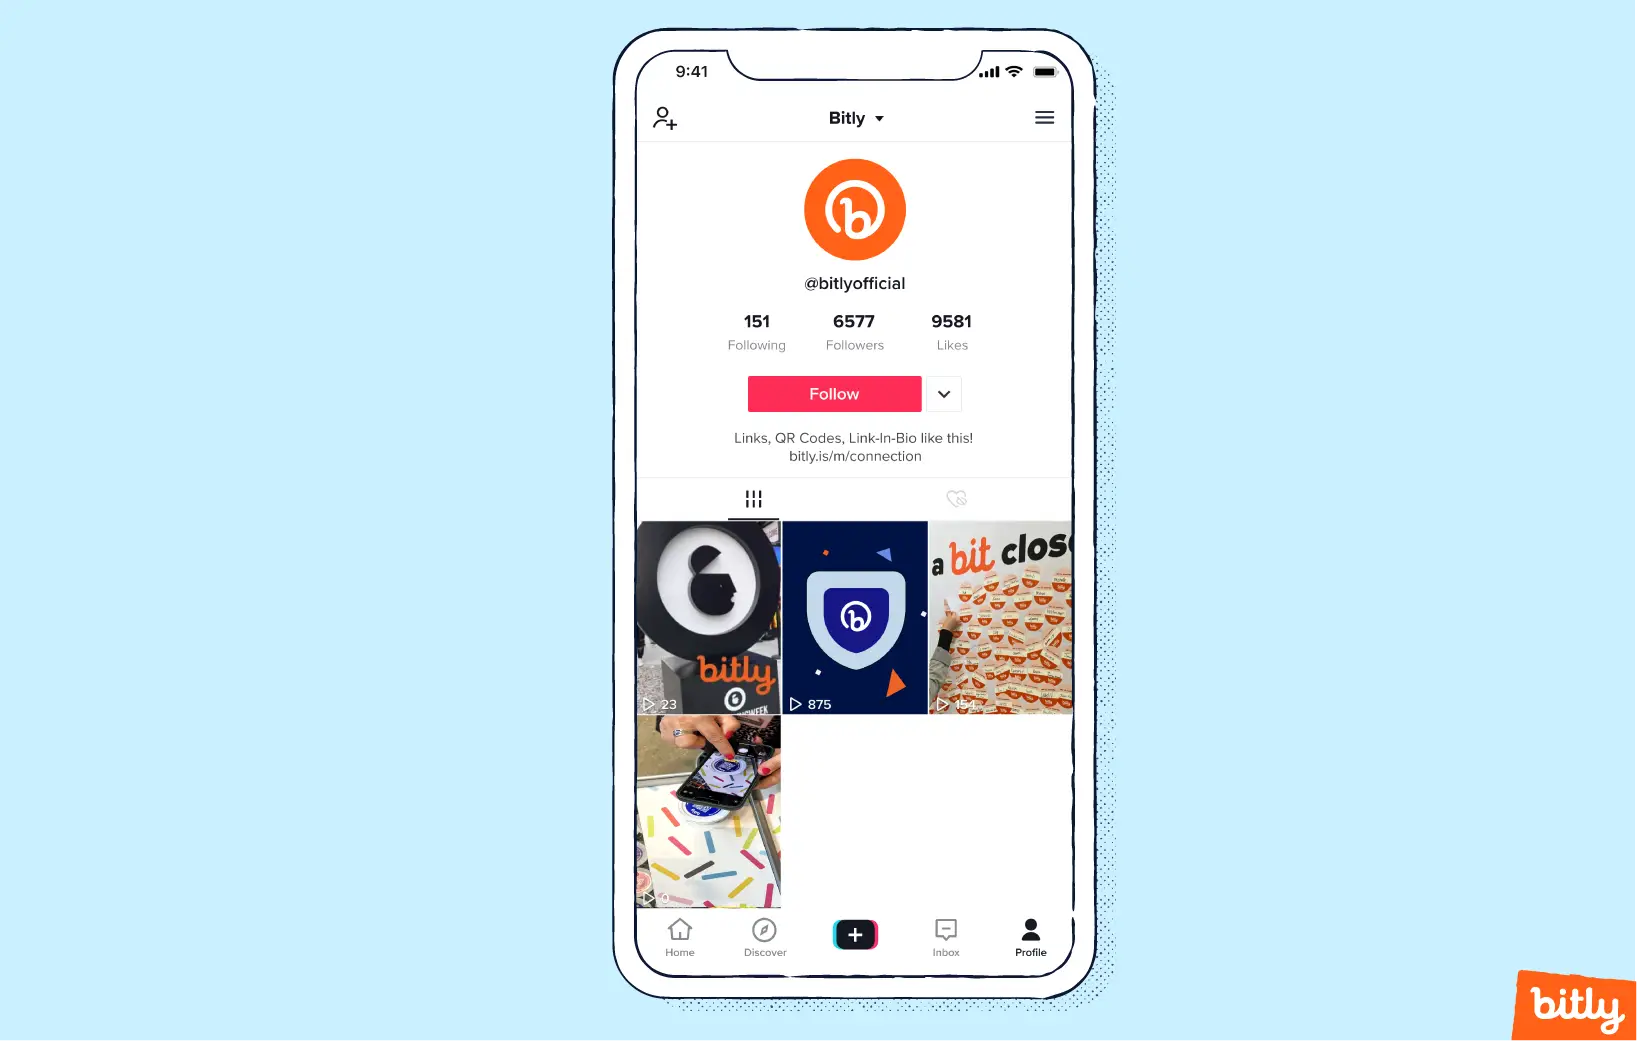 A render of Bitly's TikTok profile with a Link-in-bio on a blue background.